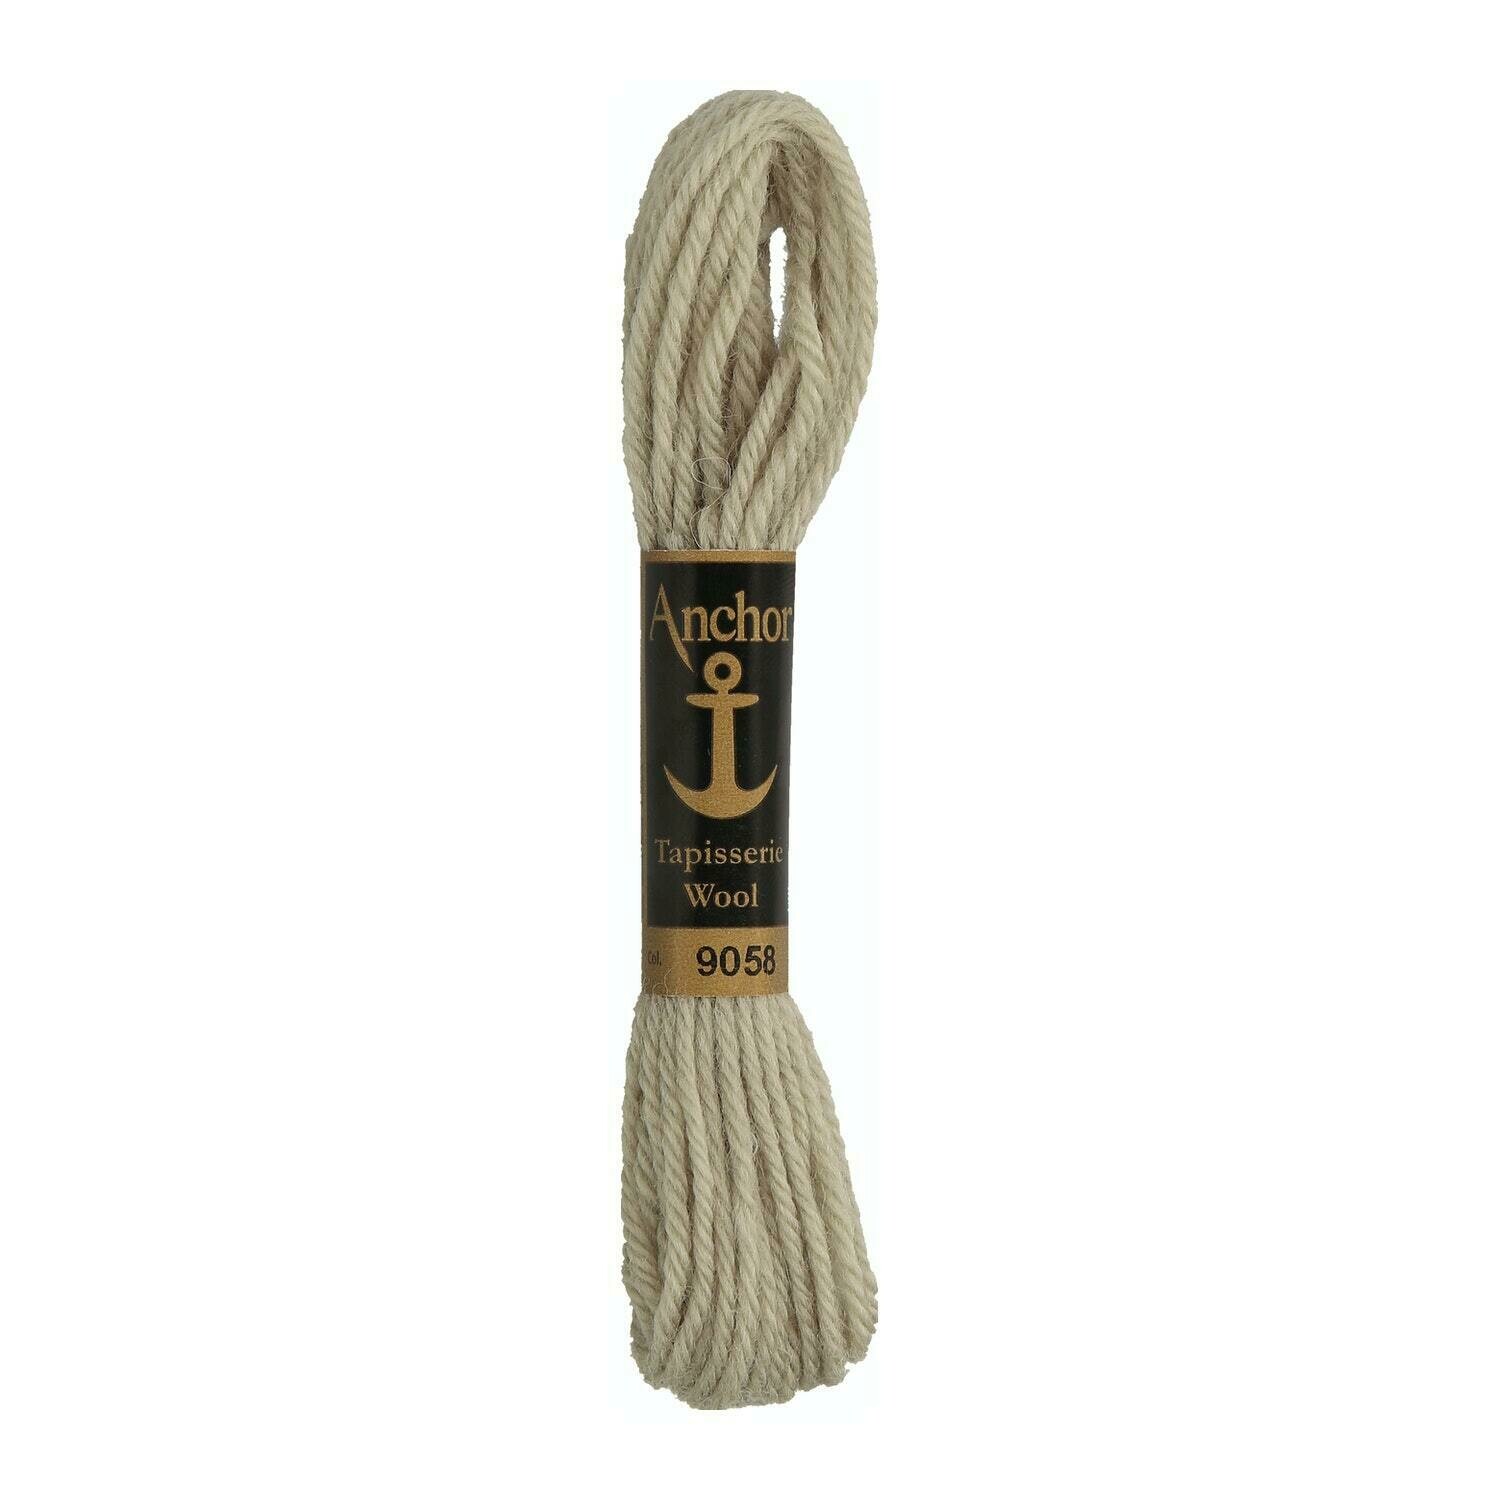 Anchor Tapisserie Wool #09058